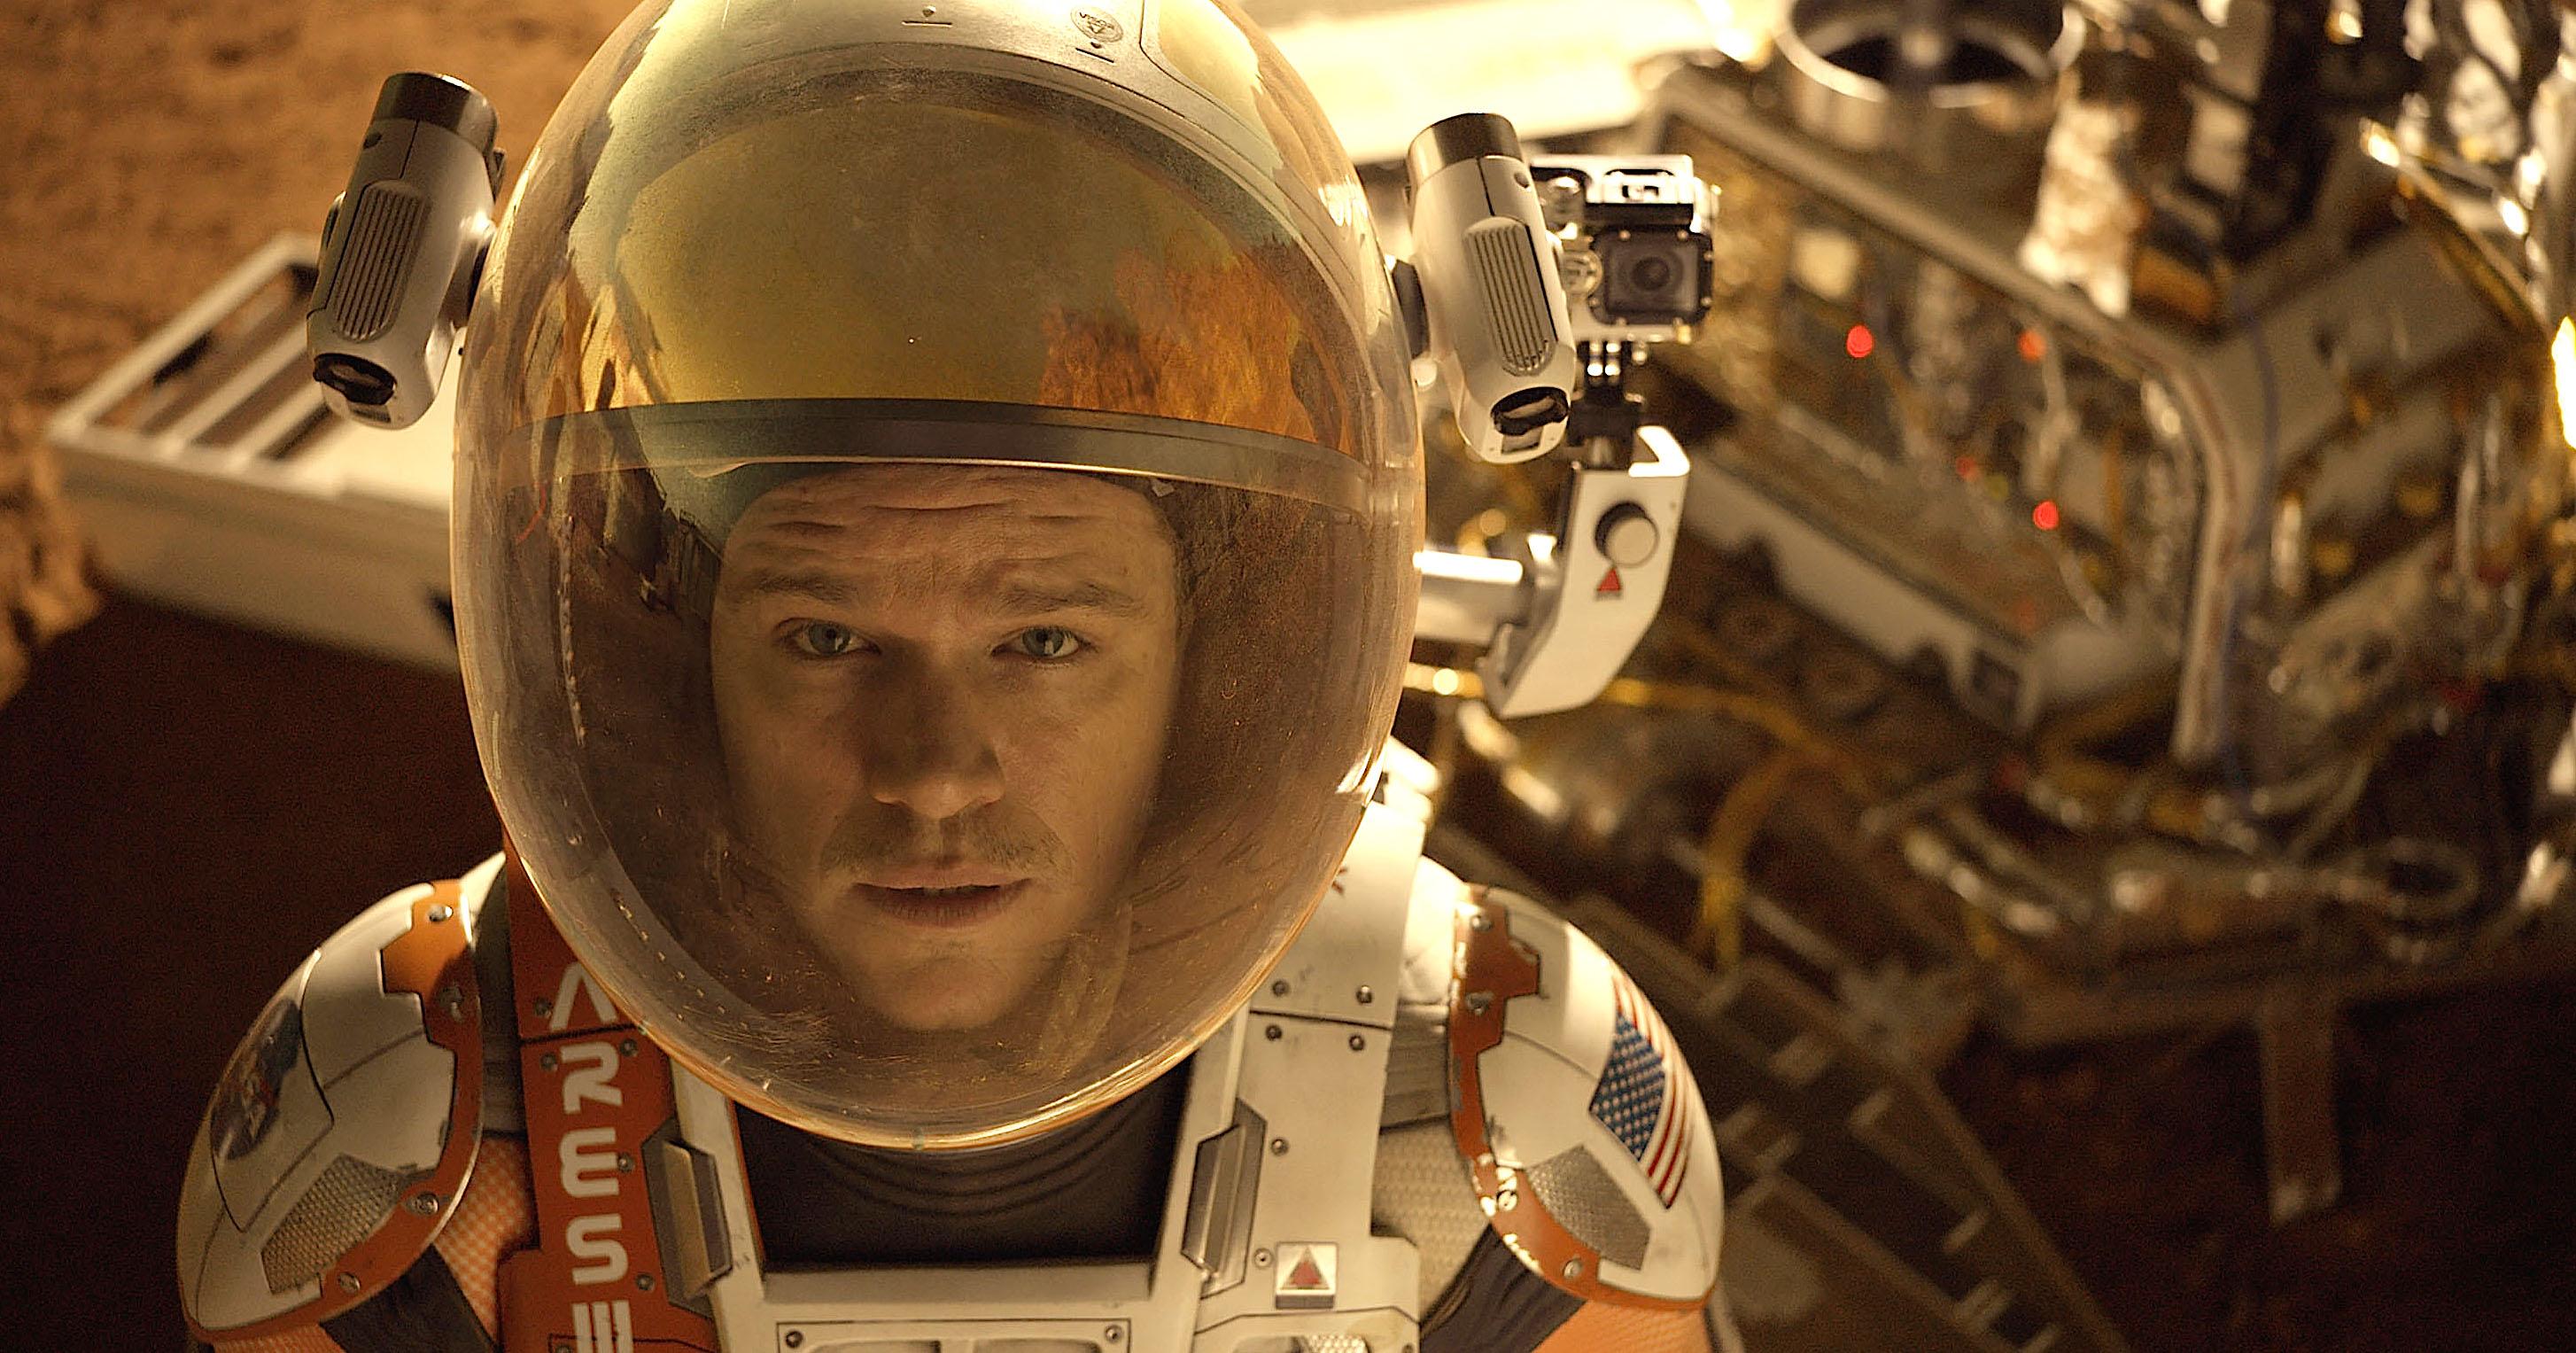 The Martian (Movie Review)